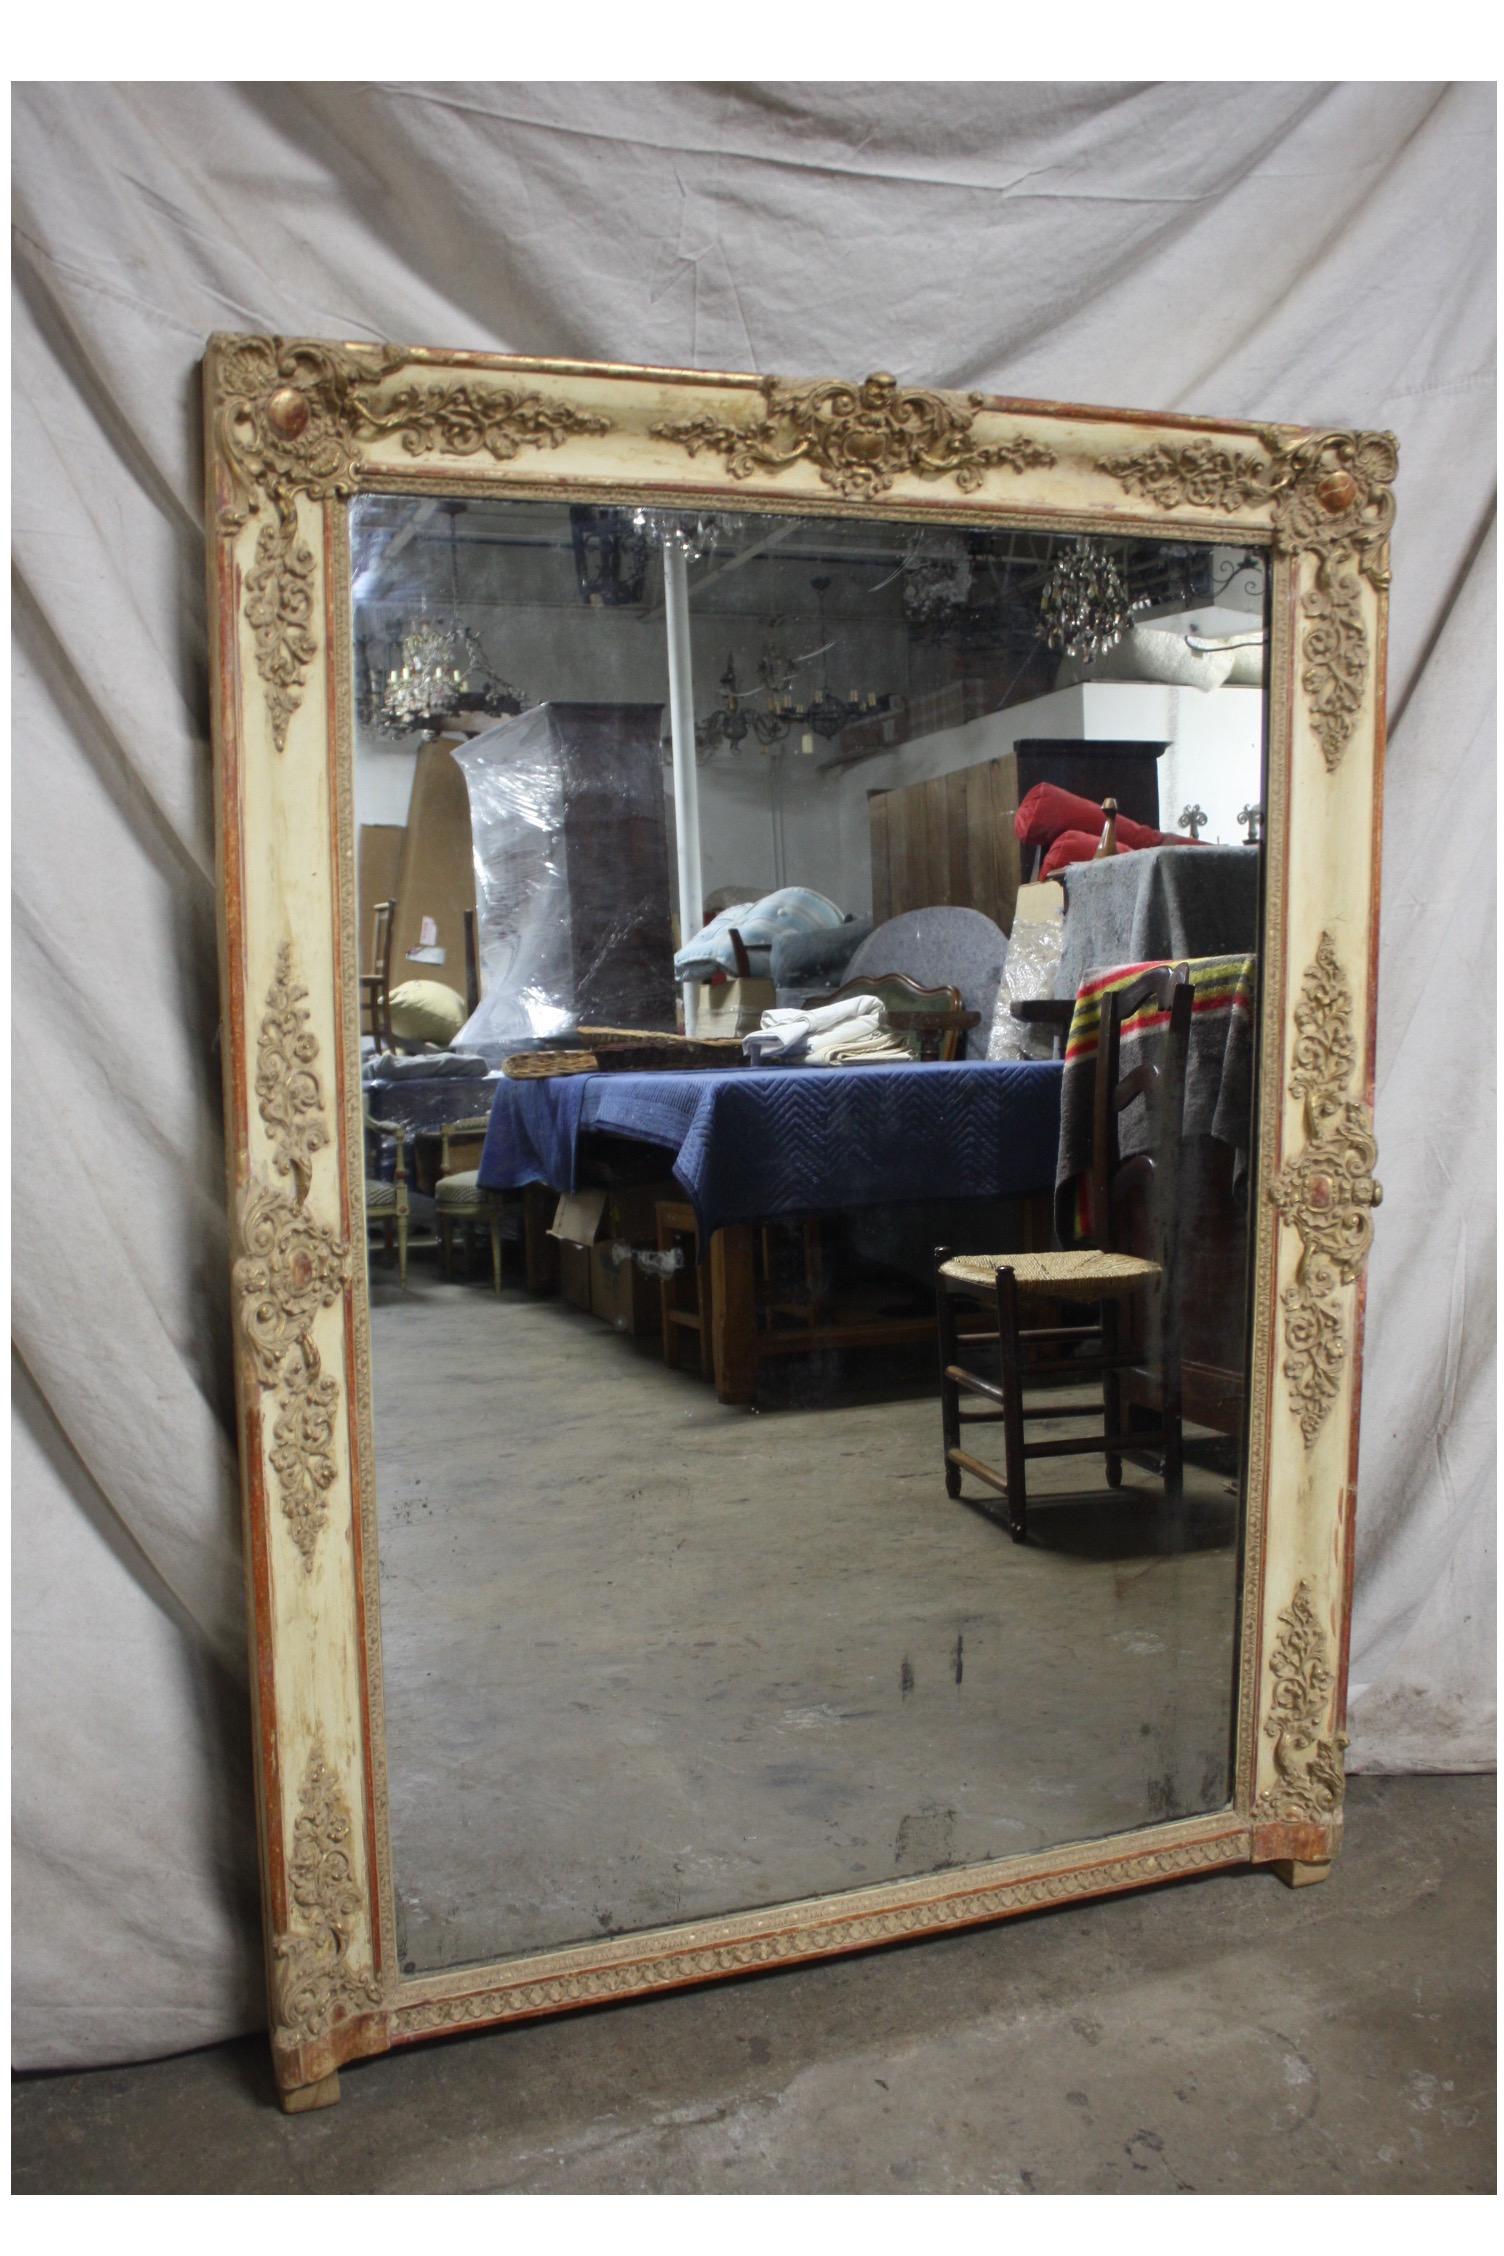 Early 19th Century French Mirror In Good Condition For Sale In Stockbridge, GA